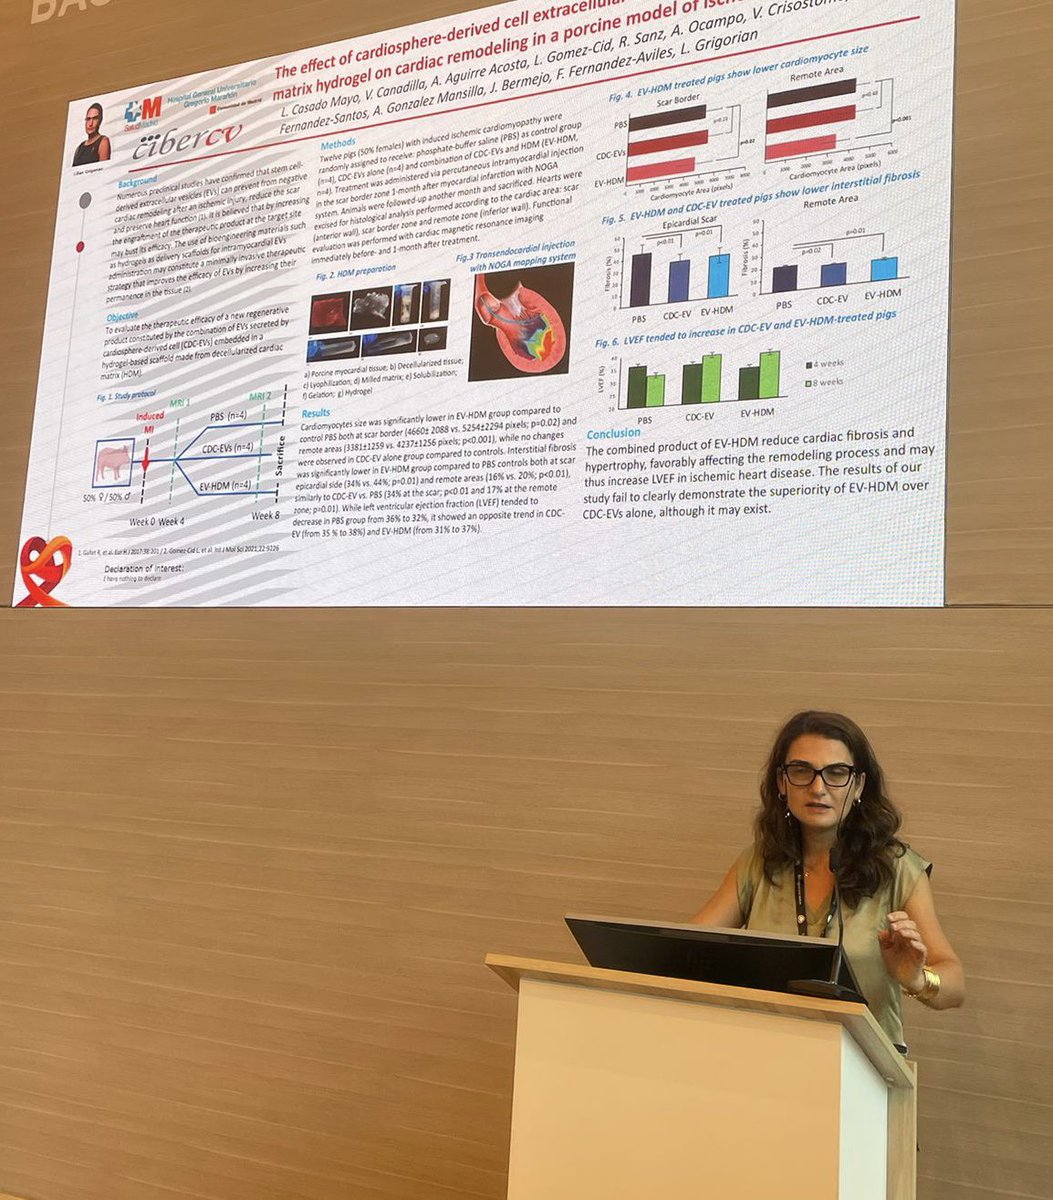 Our study failed to clearly demonstrate the superiority of embedding #EVs in cardiac matrix hydrogel (EV-HDM) vs. #EVs alone in cardioprotection. 
The efficacy of EVs w/w-out HDM was confirmed. 
#negativeresultsarealsoresults #ESCCongress #BasicScience #SomosElMarañon @RiSanz2020